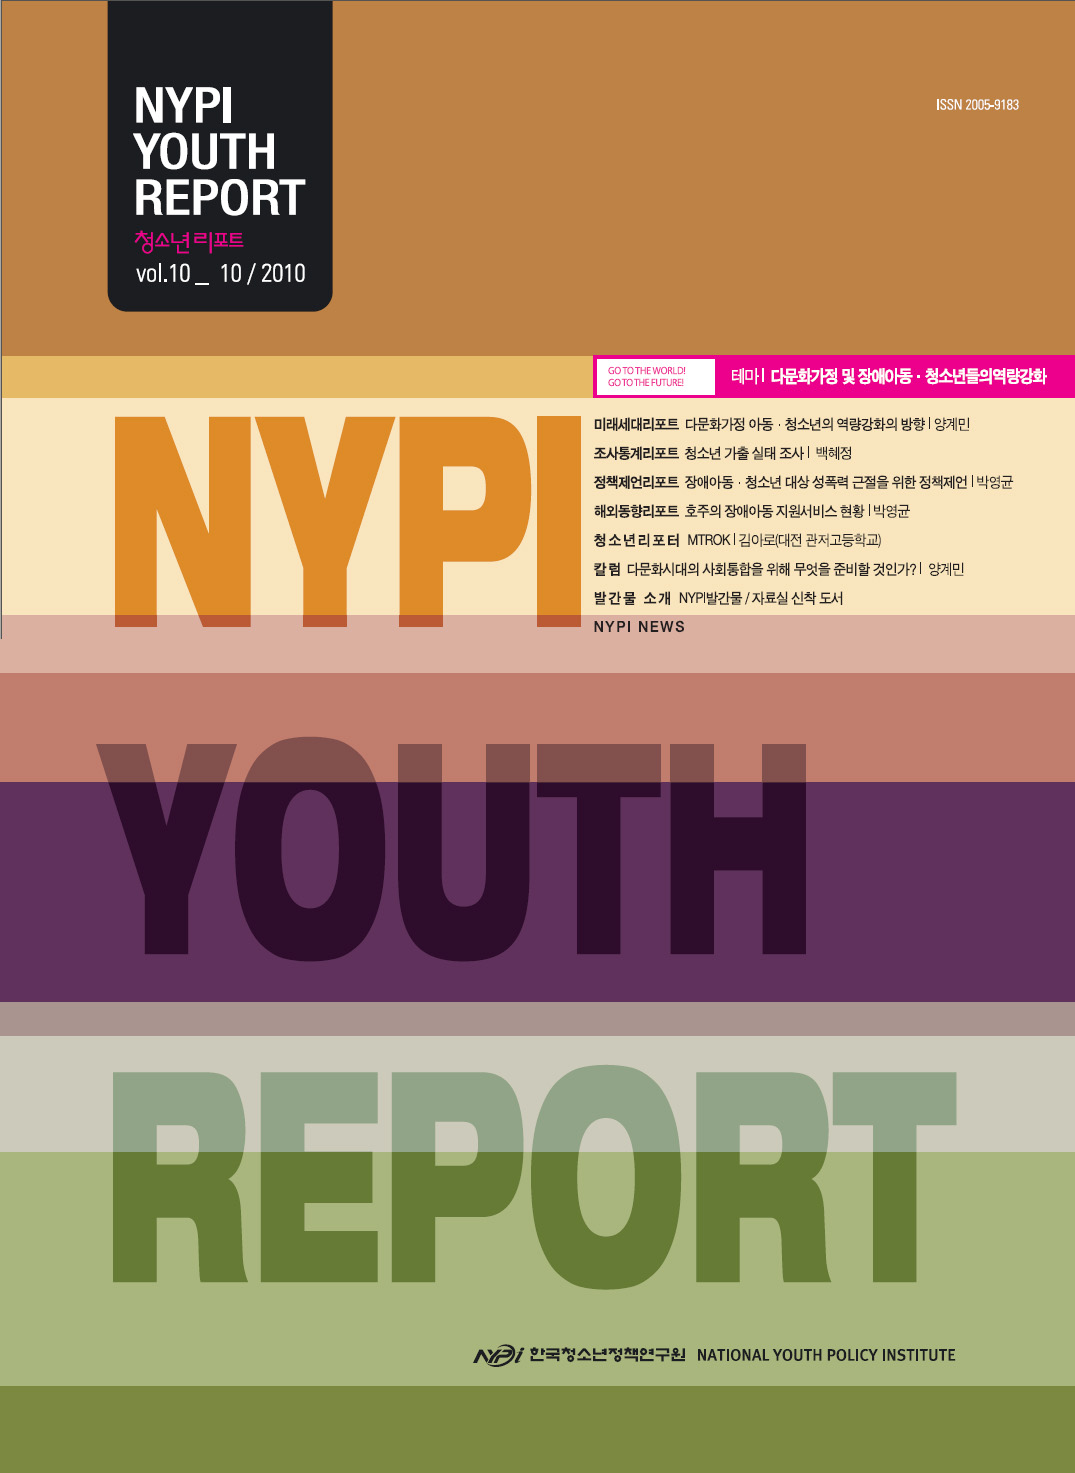 NYPI YOUTH REPORT (vol.10_11/2010)